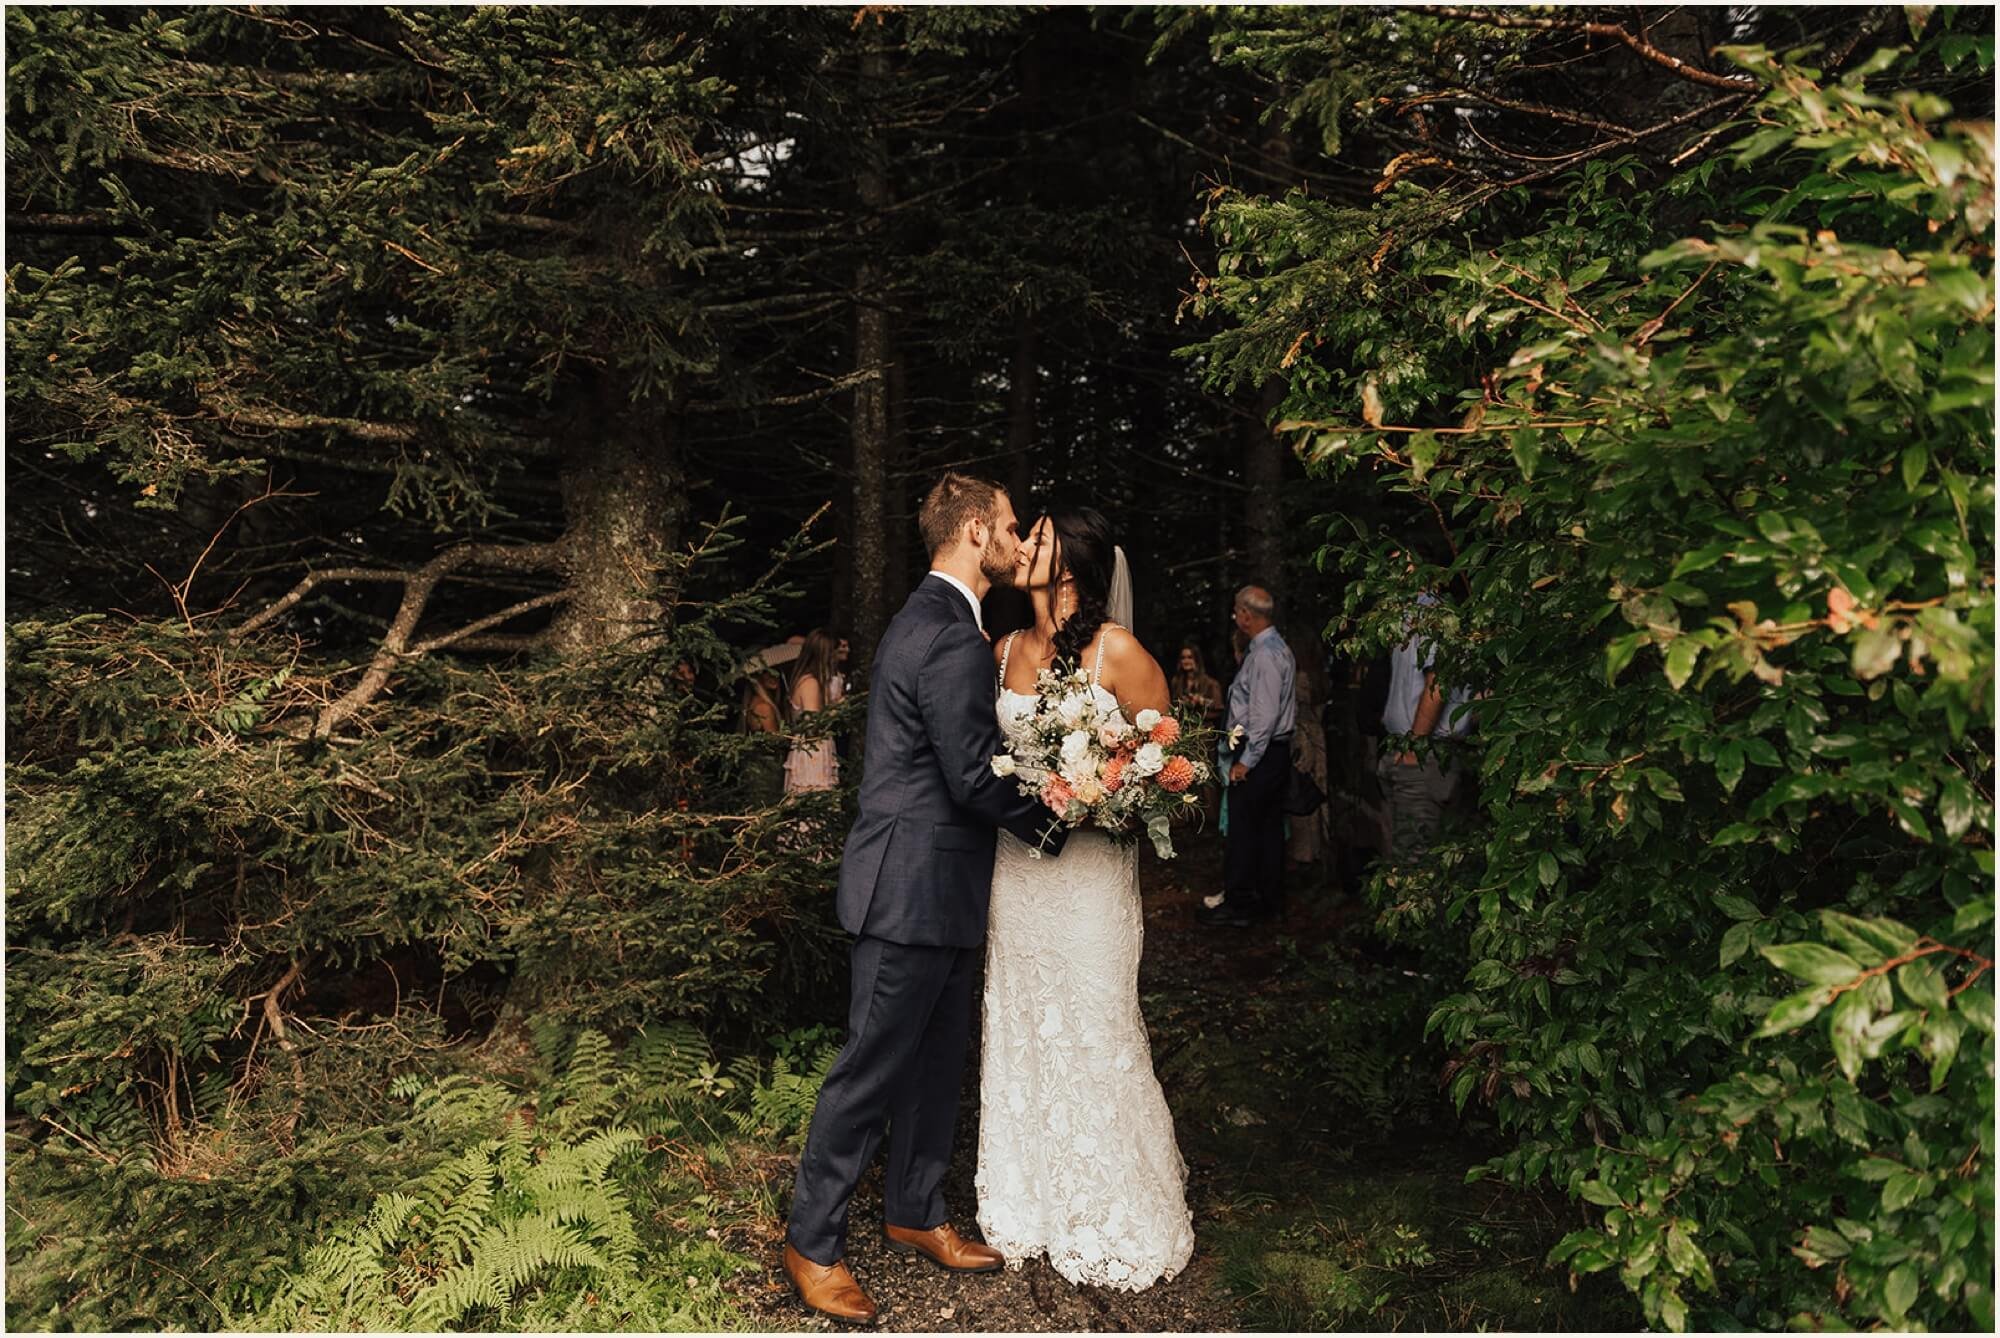 Bride and groom kissing after Blue Ridge Mountains wedding